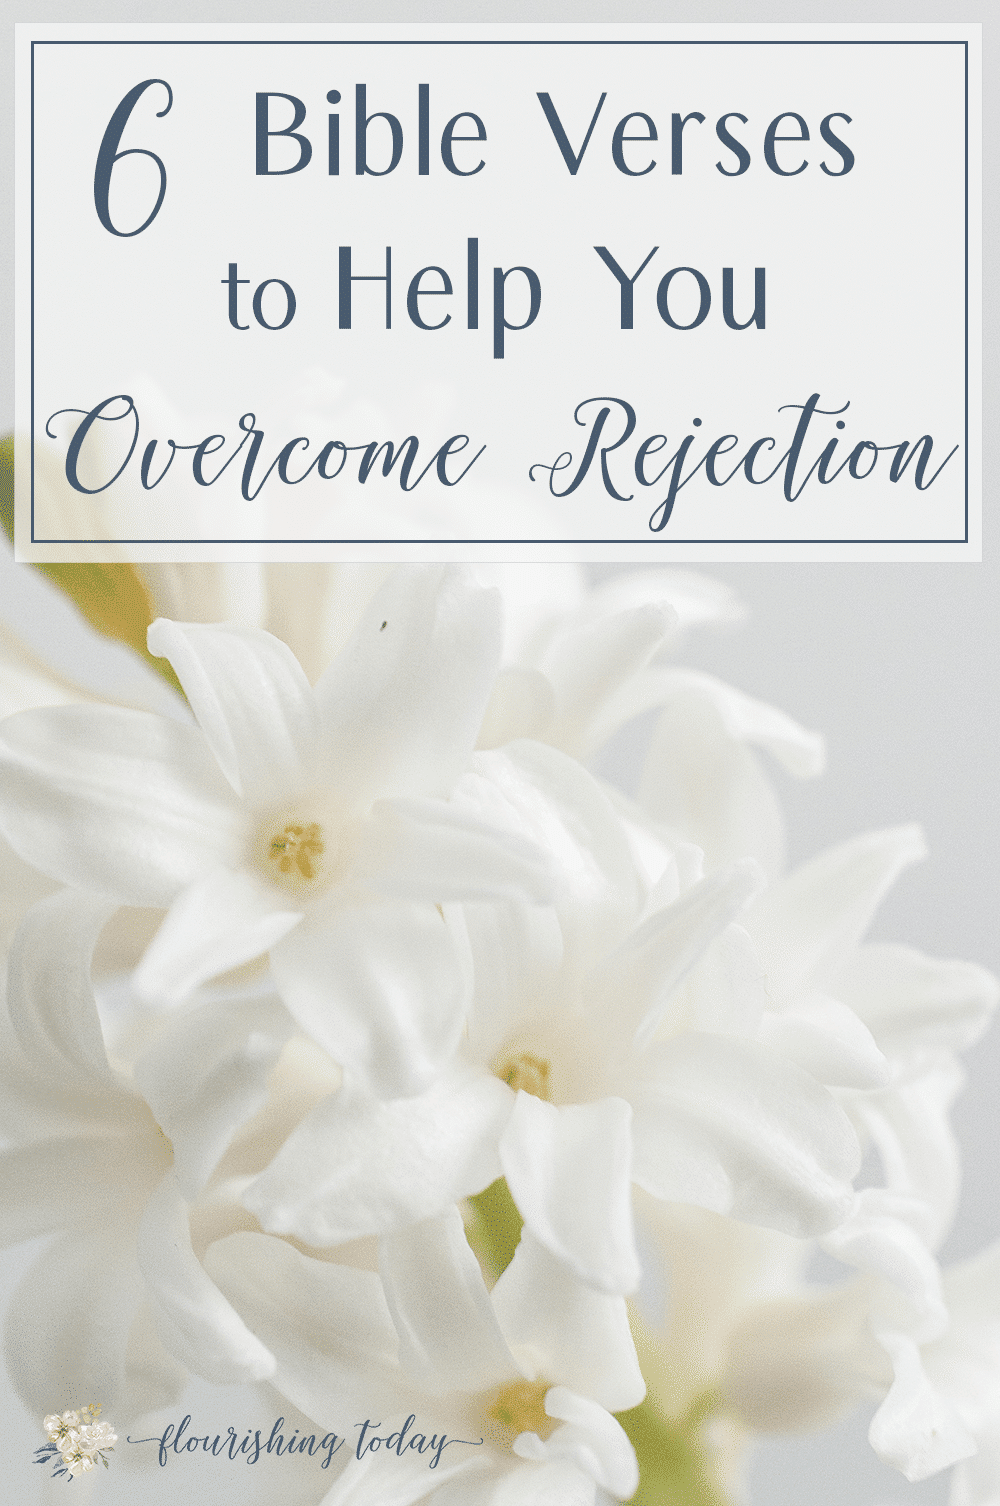 Are you struggling to overcome rejection in your life? Are past wounds keeping you from flourishing relationships? Here are 6 Bible verses and confession to help you overcome rejection in life. #bibleverses #scriptures #prayers #freeprintable